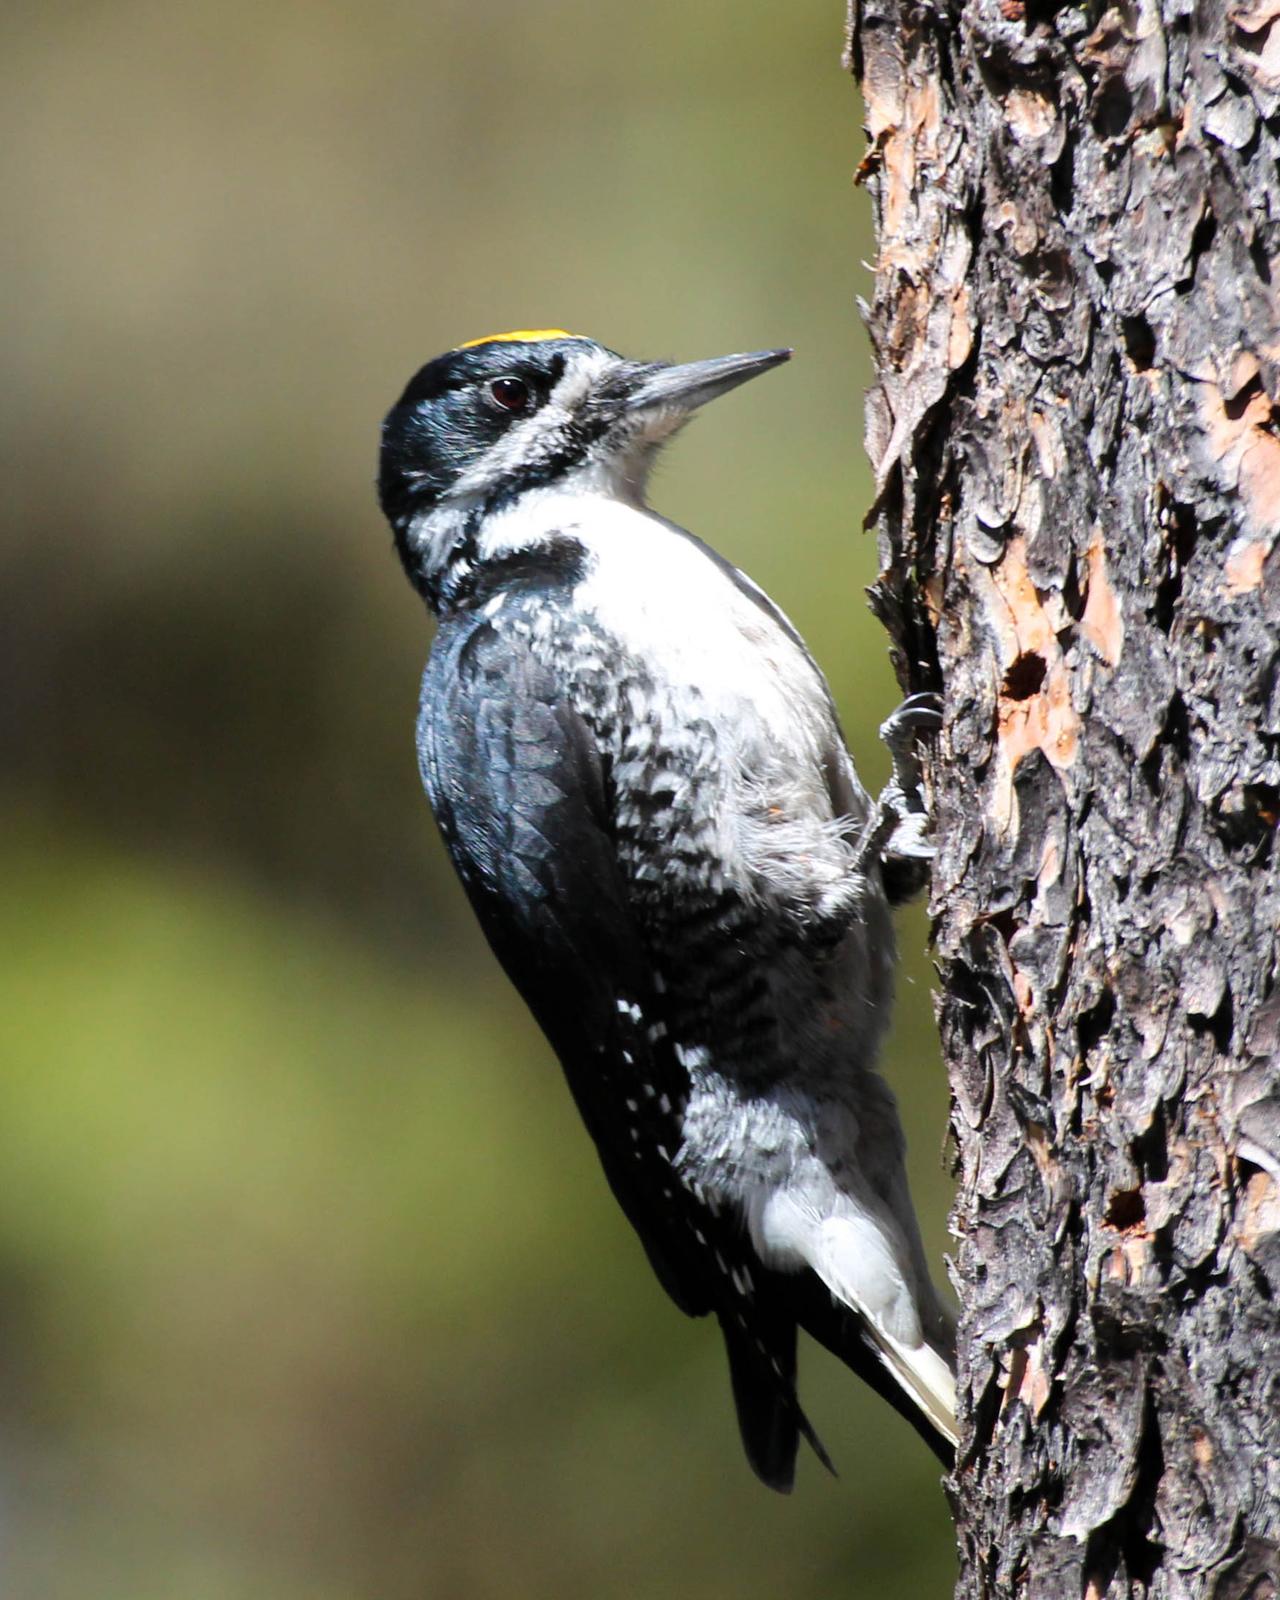 Black-backed Woodpecker Photo by Dylan Hopkins